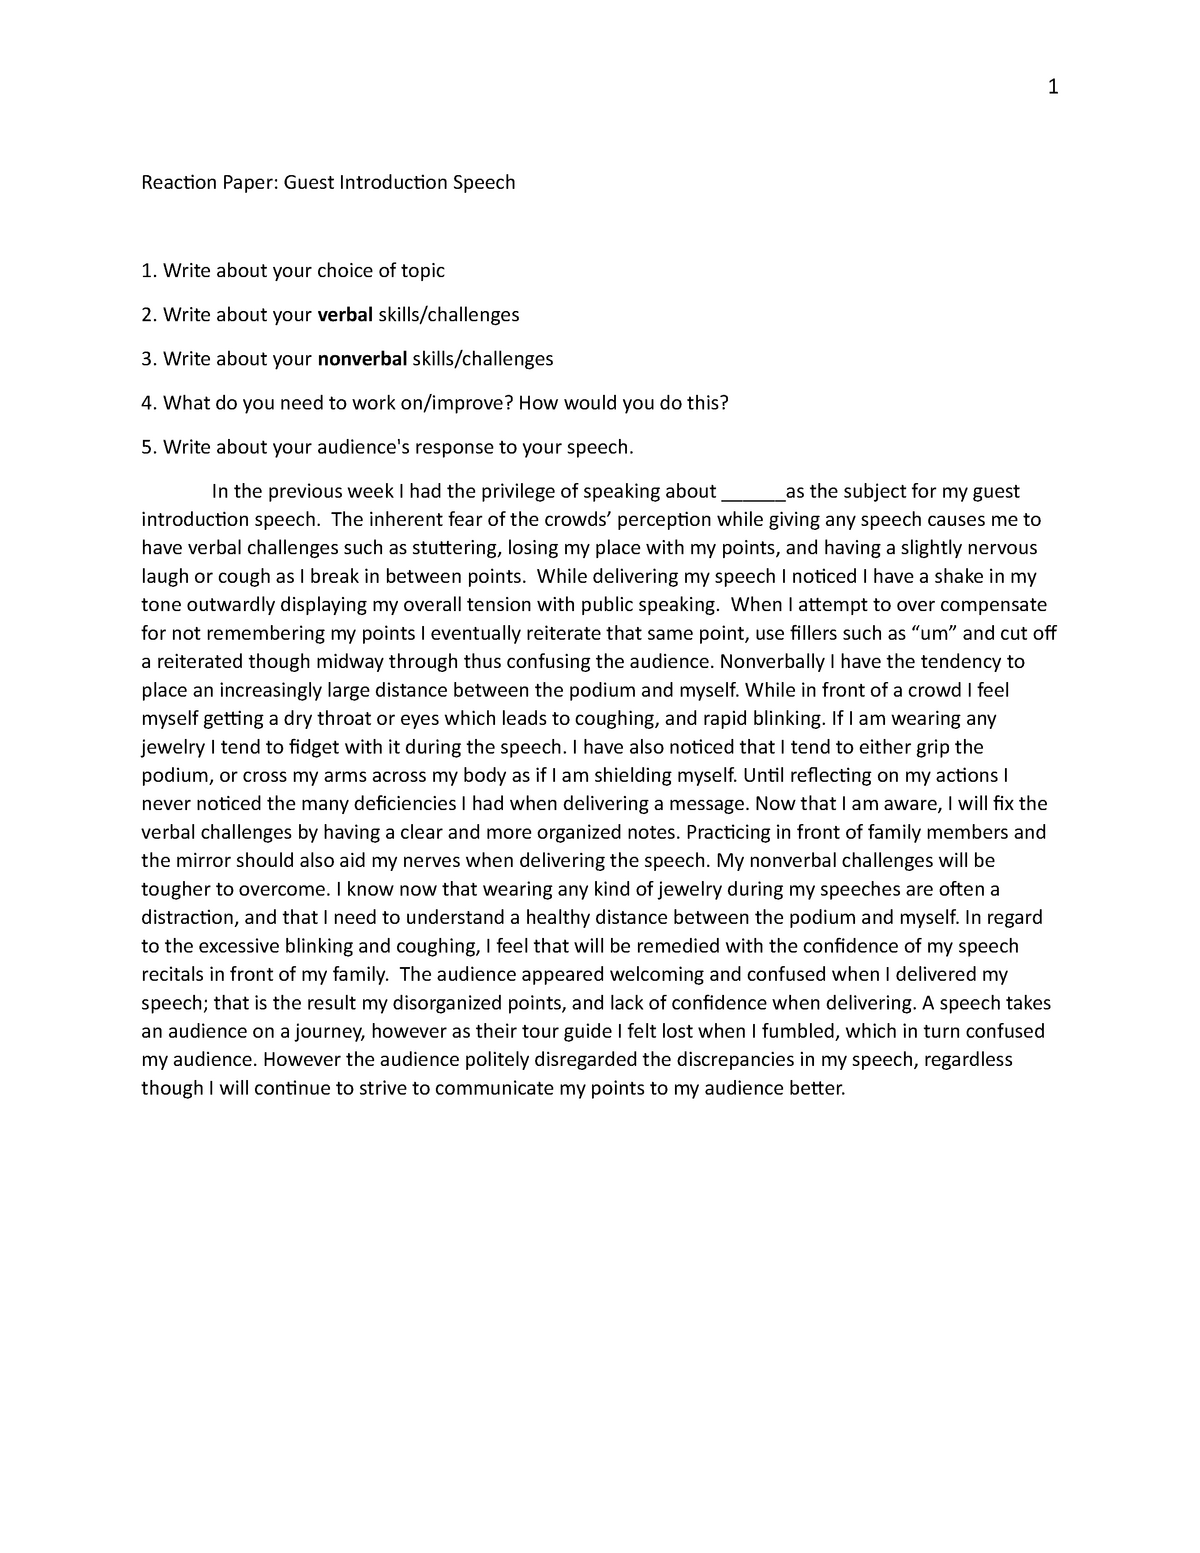 how to make a reaction paper about a speech